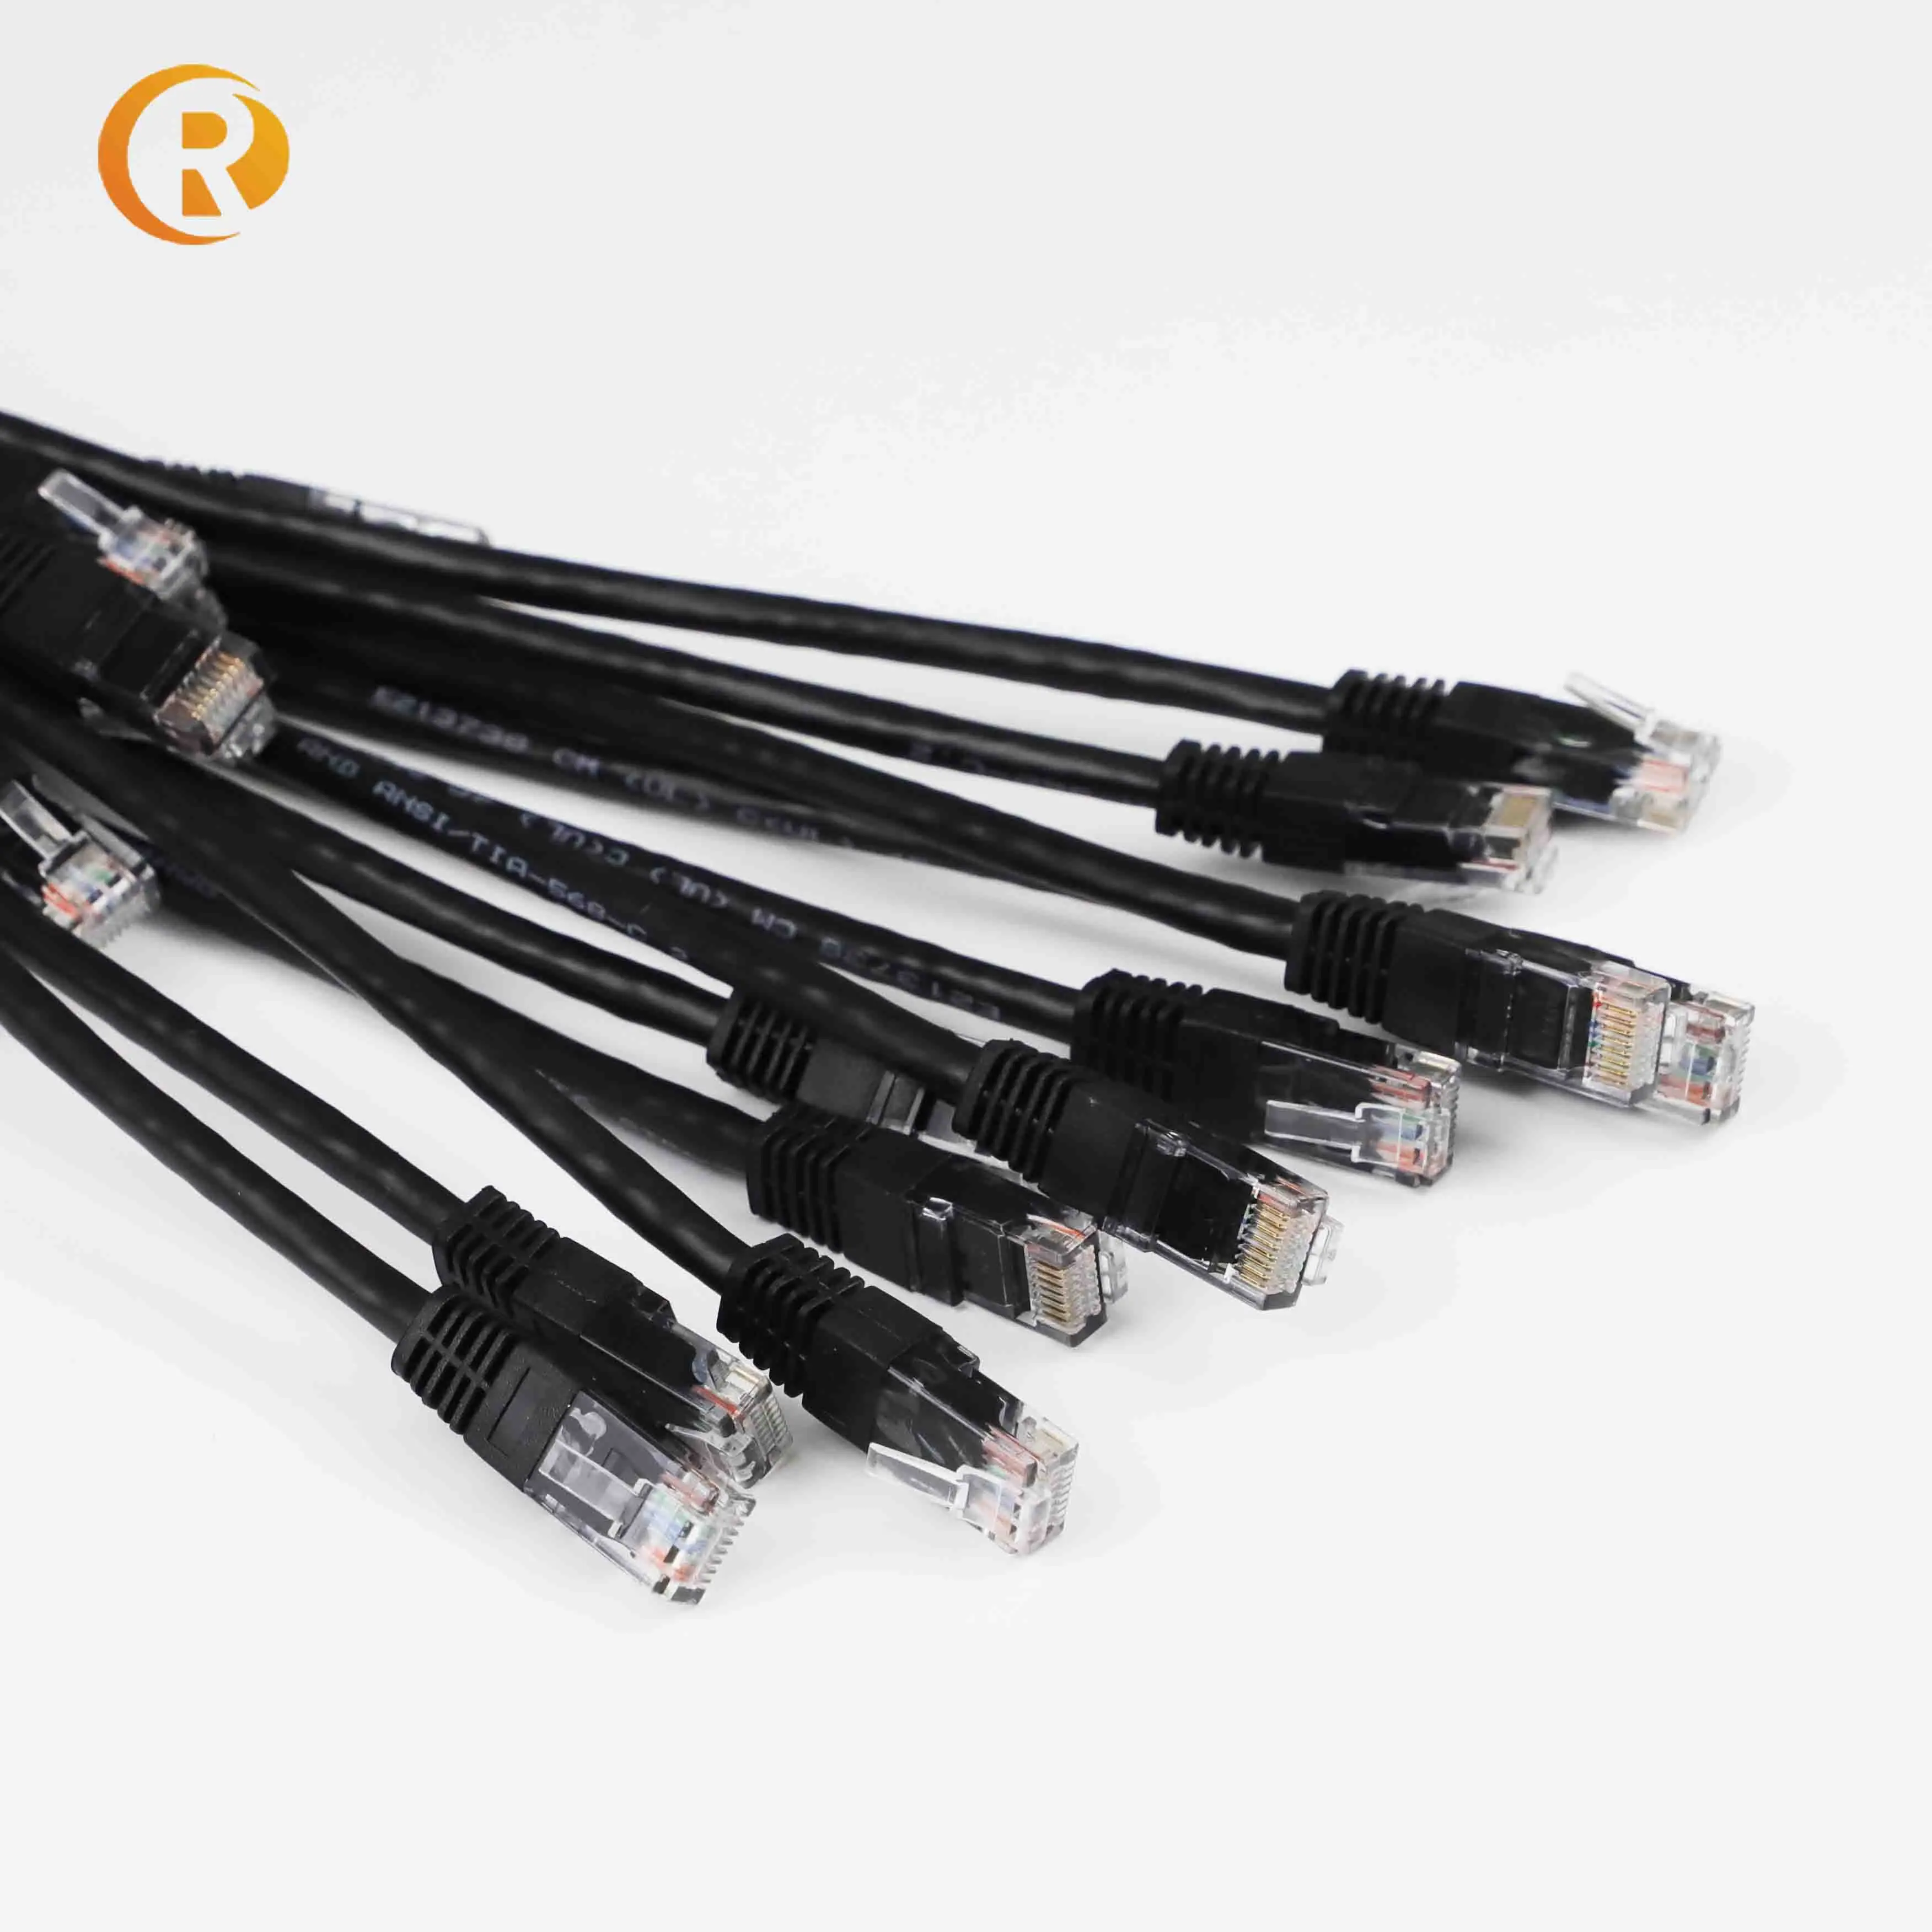 
ethernet Outdoor price 1000ft Cat6 Cat5 Network Cable for Computer 